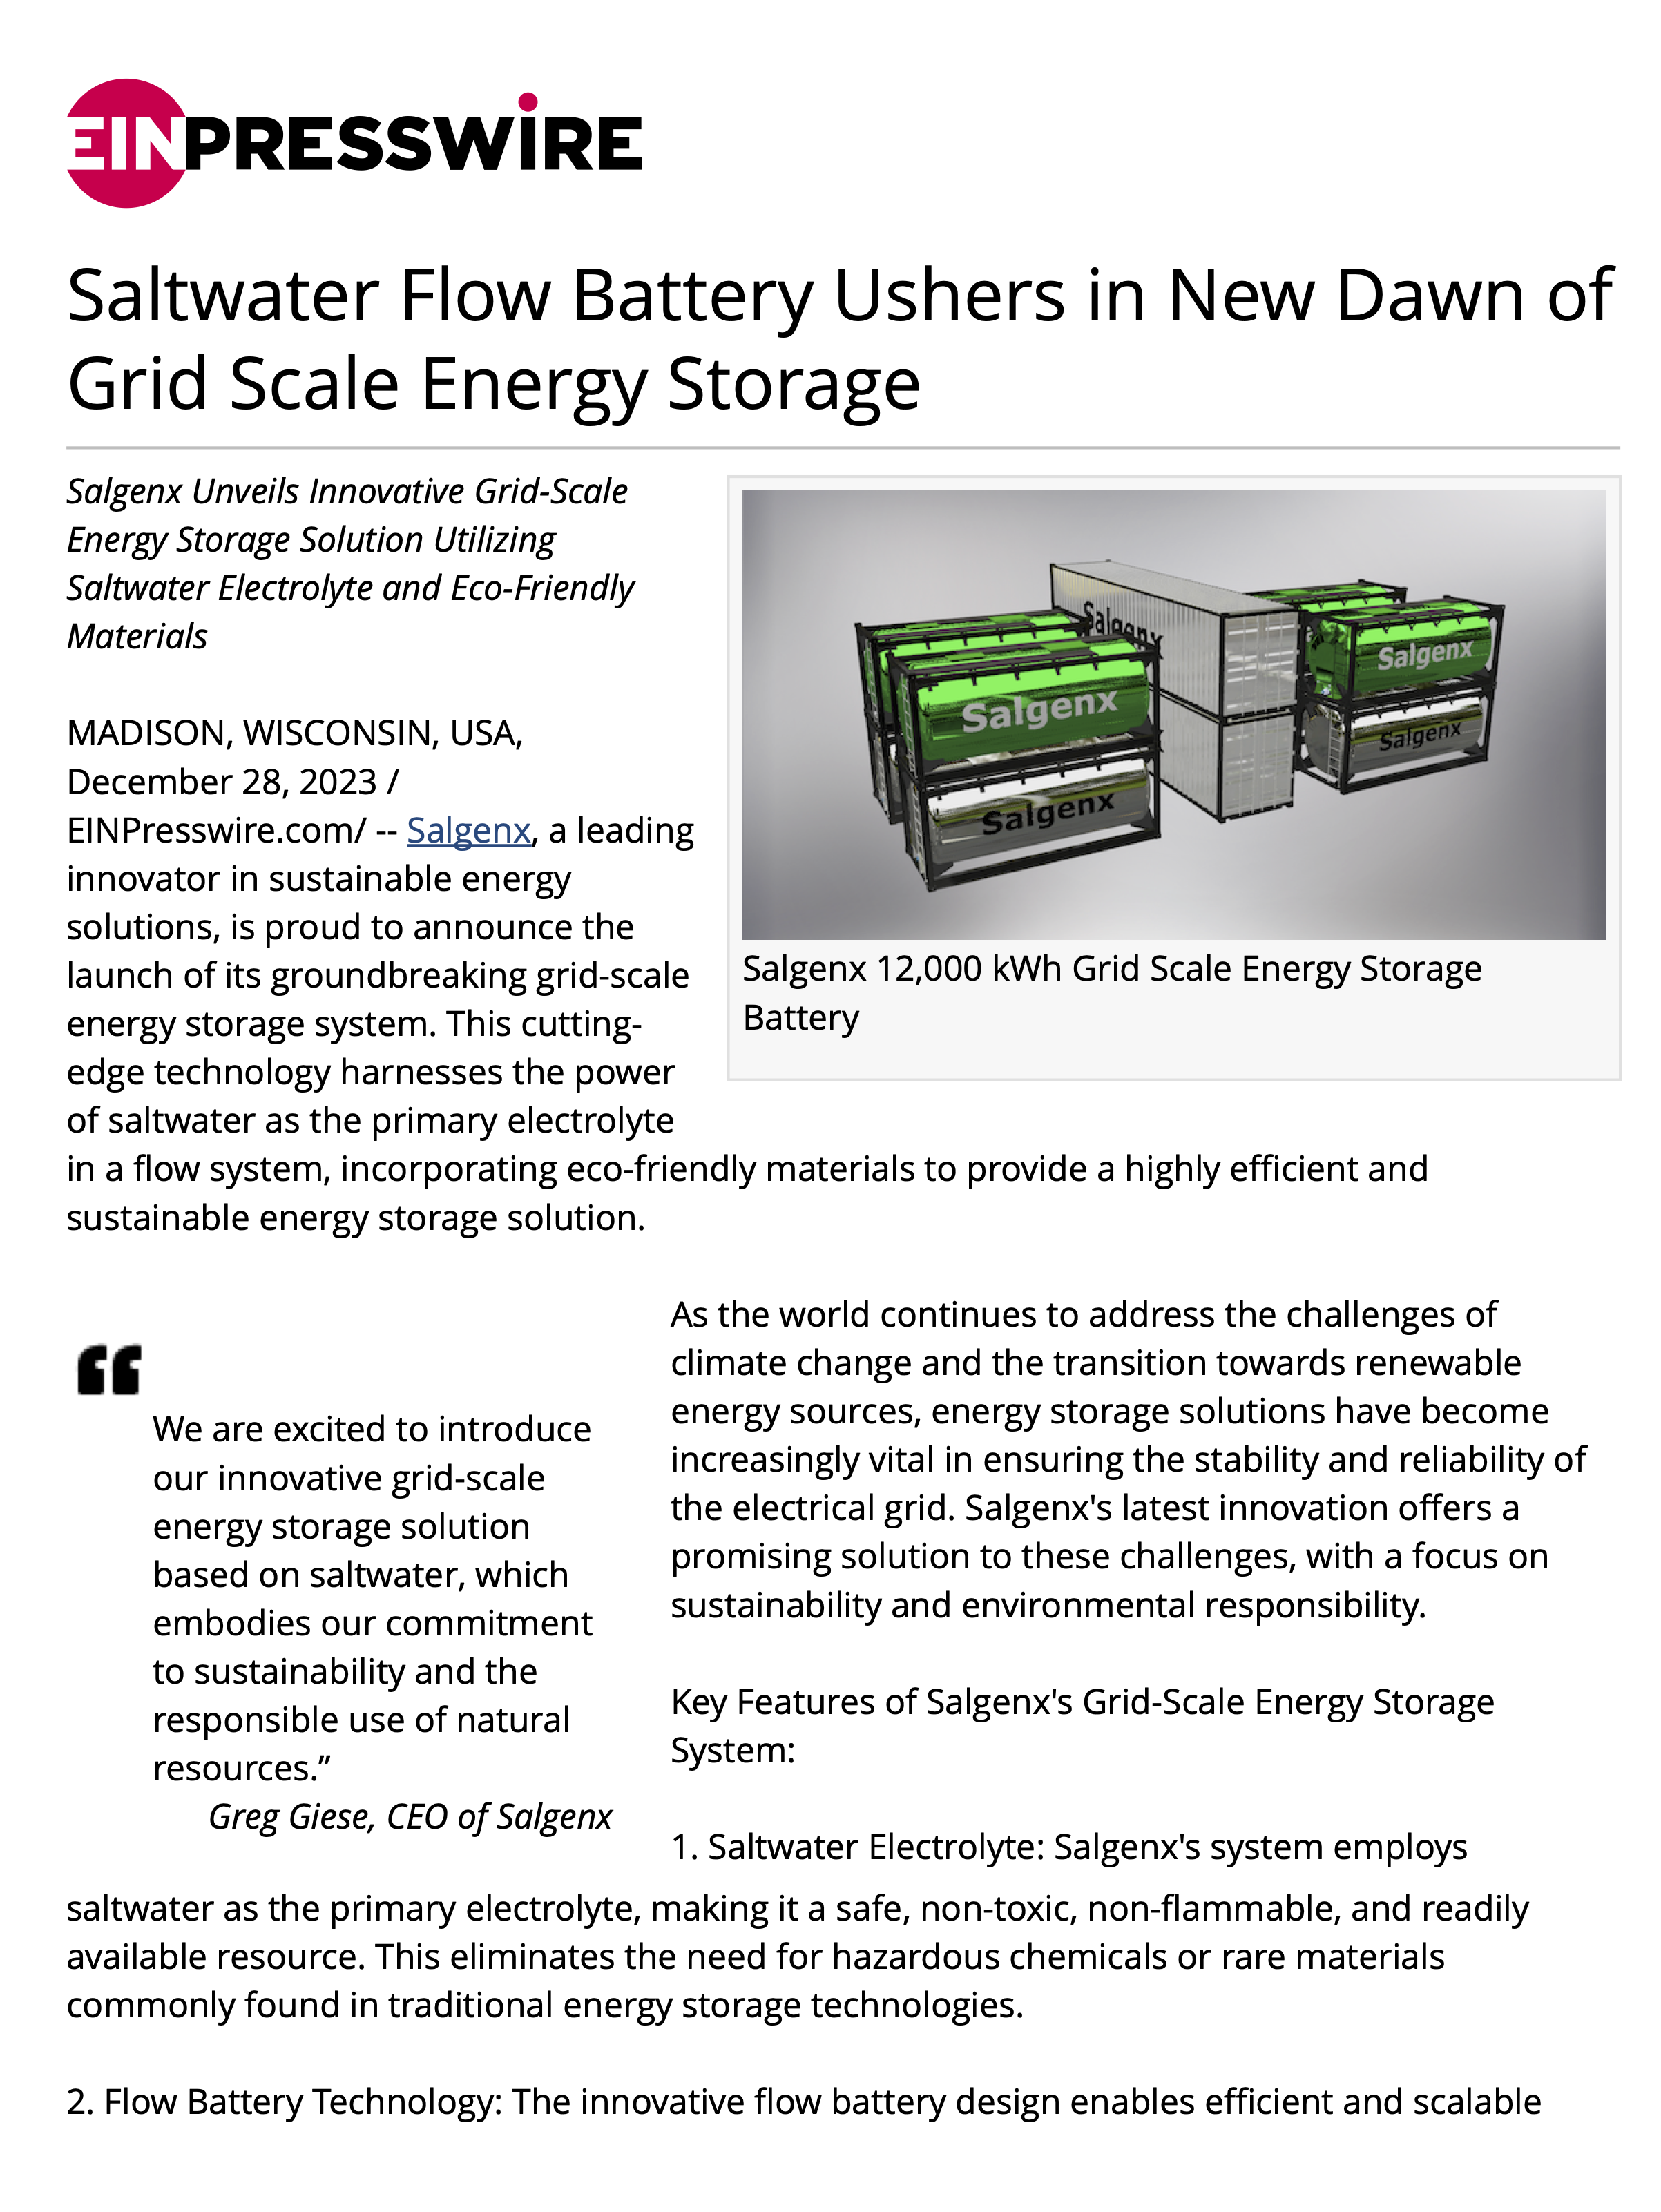 Saltwater Flow Battery Ushers in New Dawn of Grid Scale Energy Storage